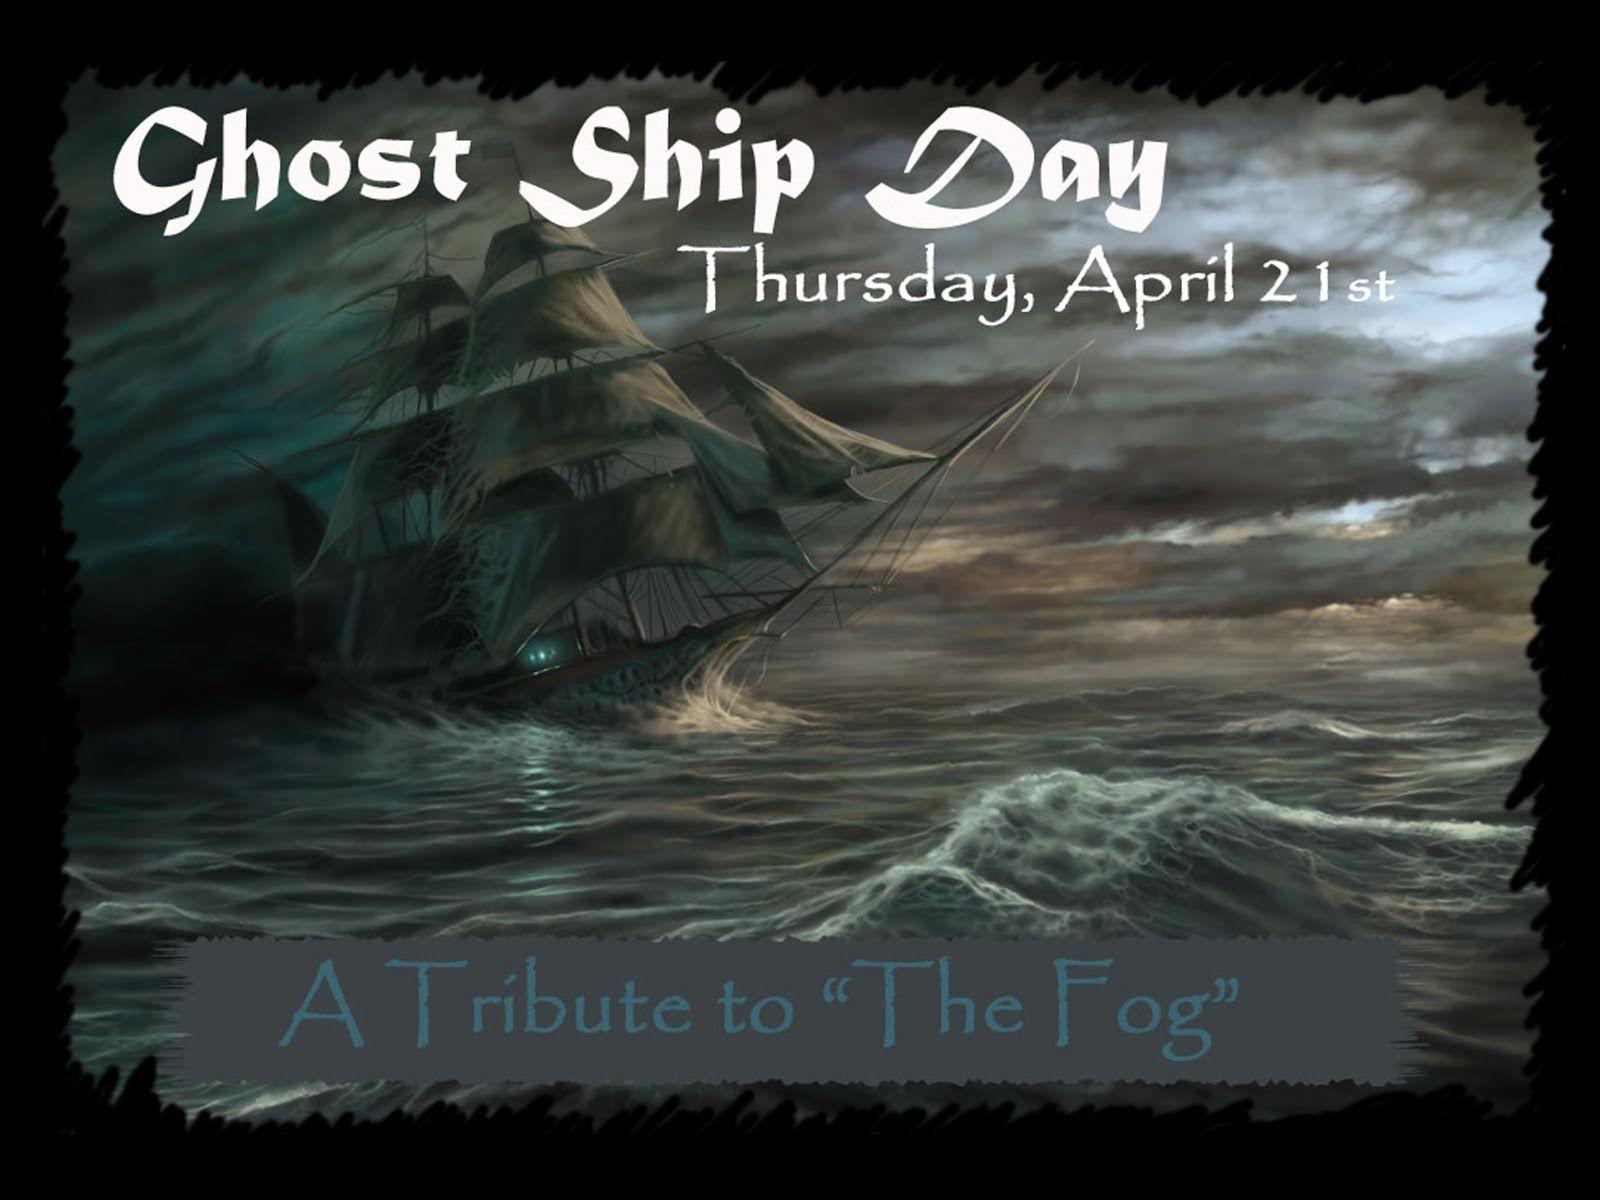 Ship Fog Logo - Johnny Thunder's Midnite Spook Frolic: Ghost Ship Day: A Tribute to ...